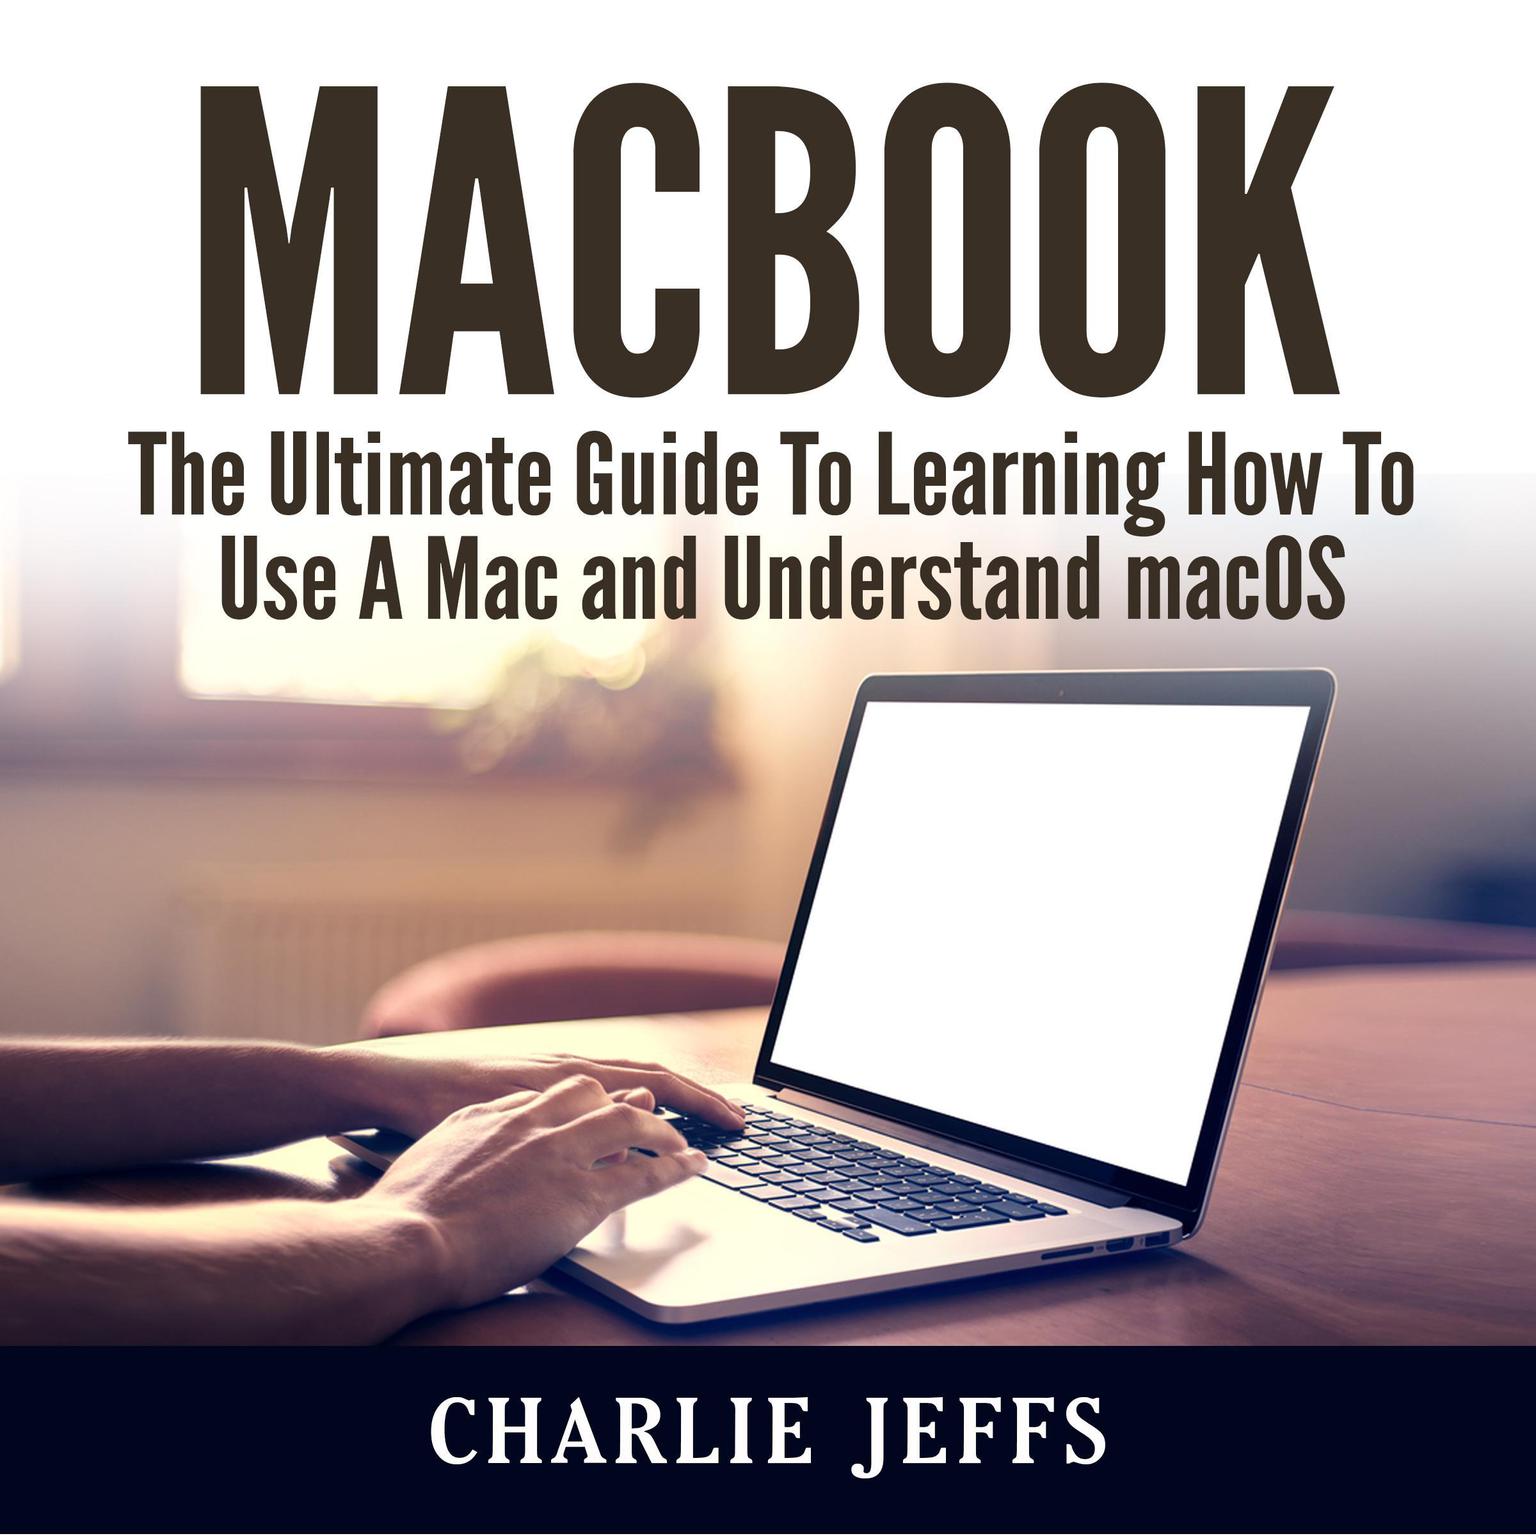 MacBook: The Ultimate Guide To Learning How To Use A Mac and Understand macOS Audiobook, by Charlie Jeffs